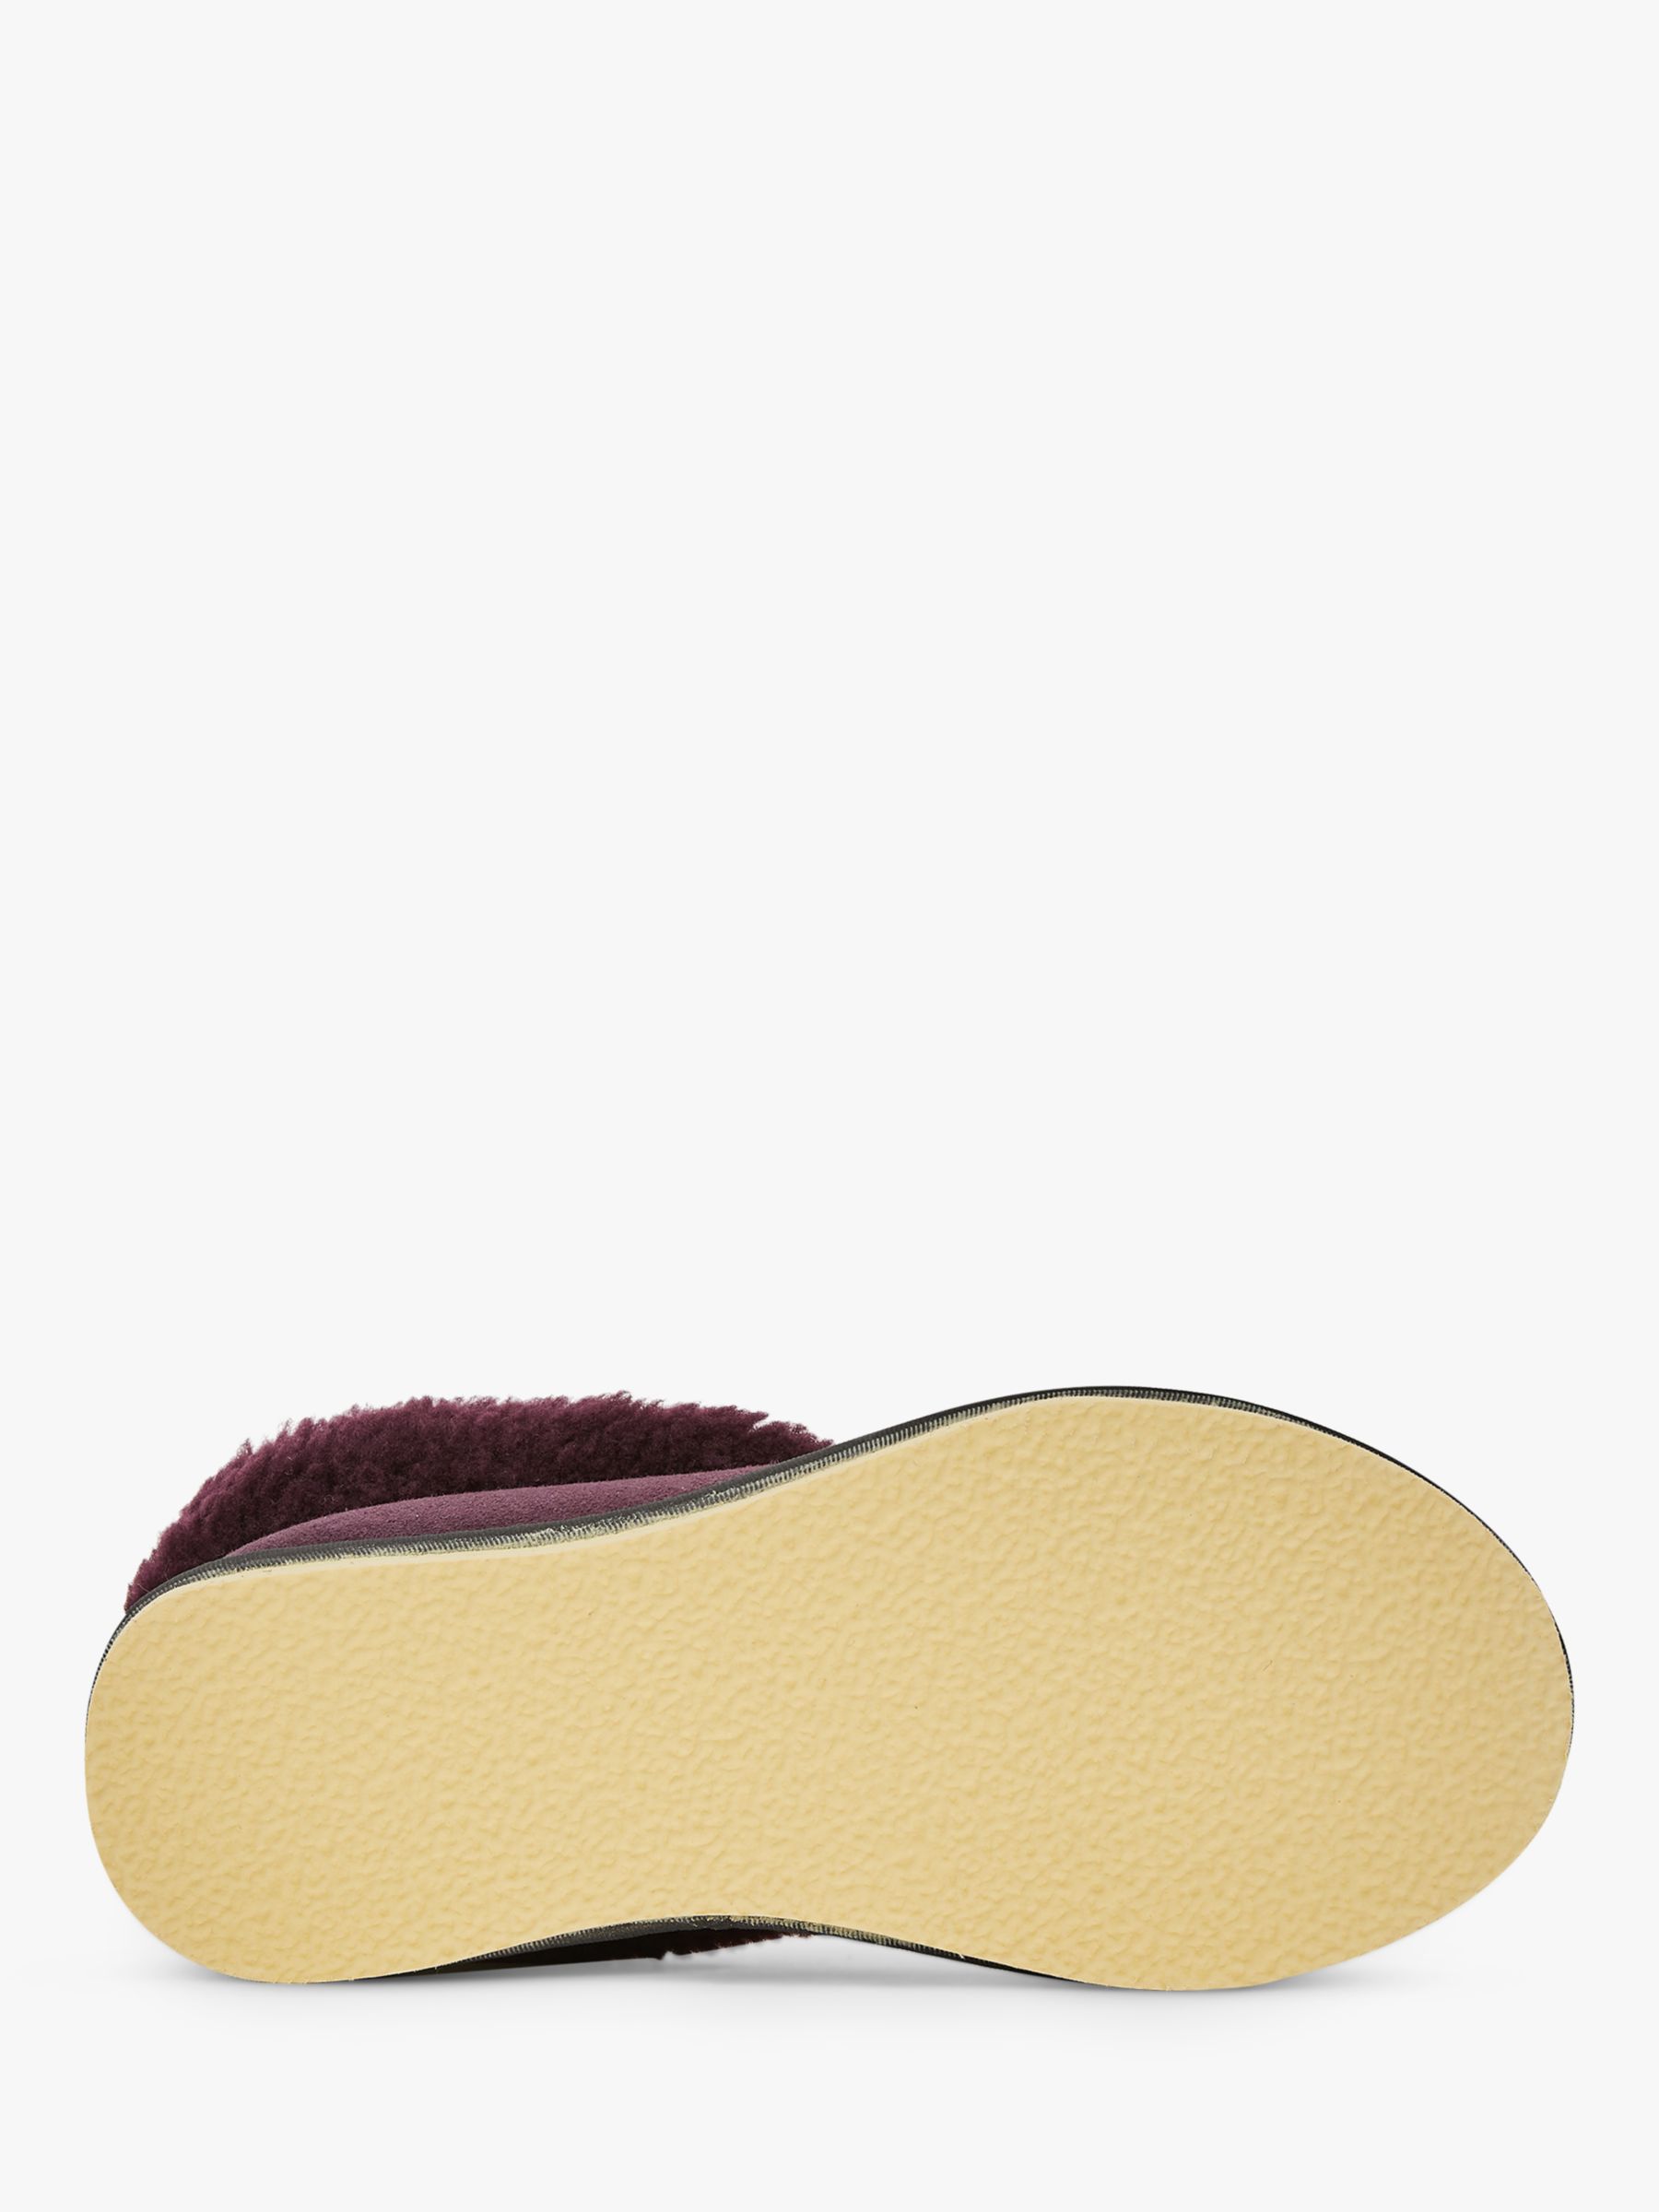 Buy Celtic & Co. Sheepskin Soft Sole Bootee Slippers Online at johnlewis.com